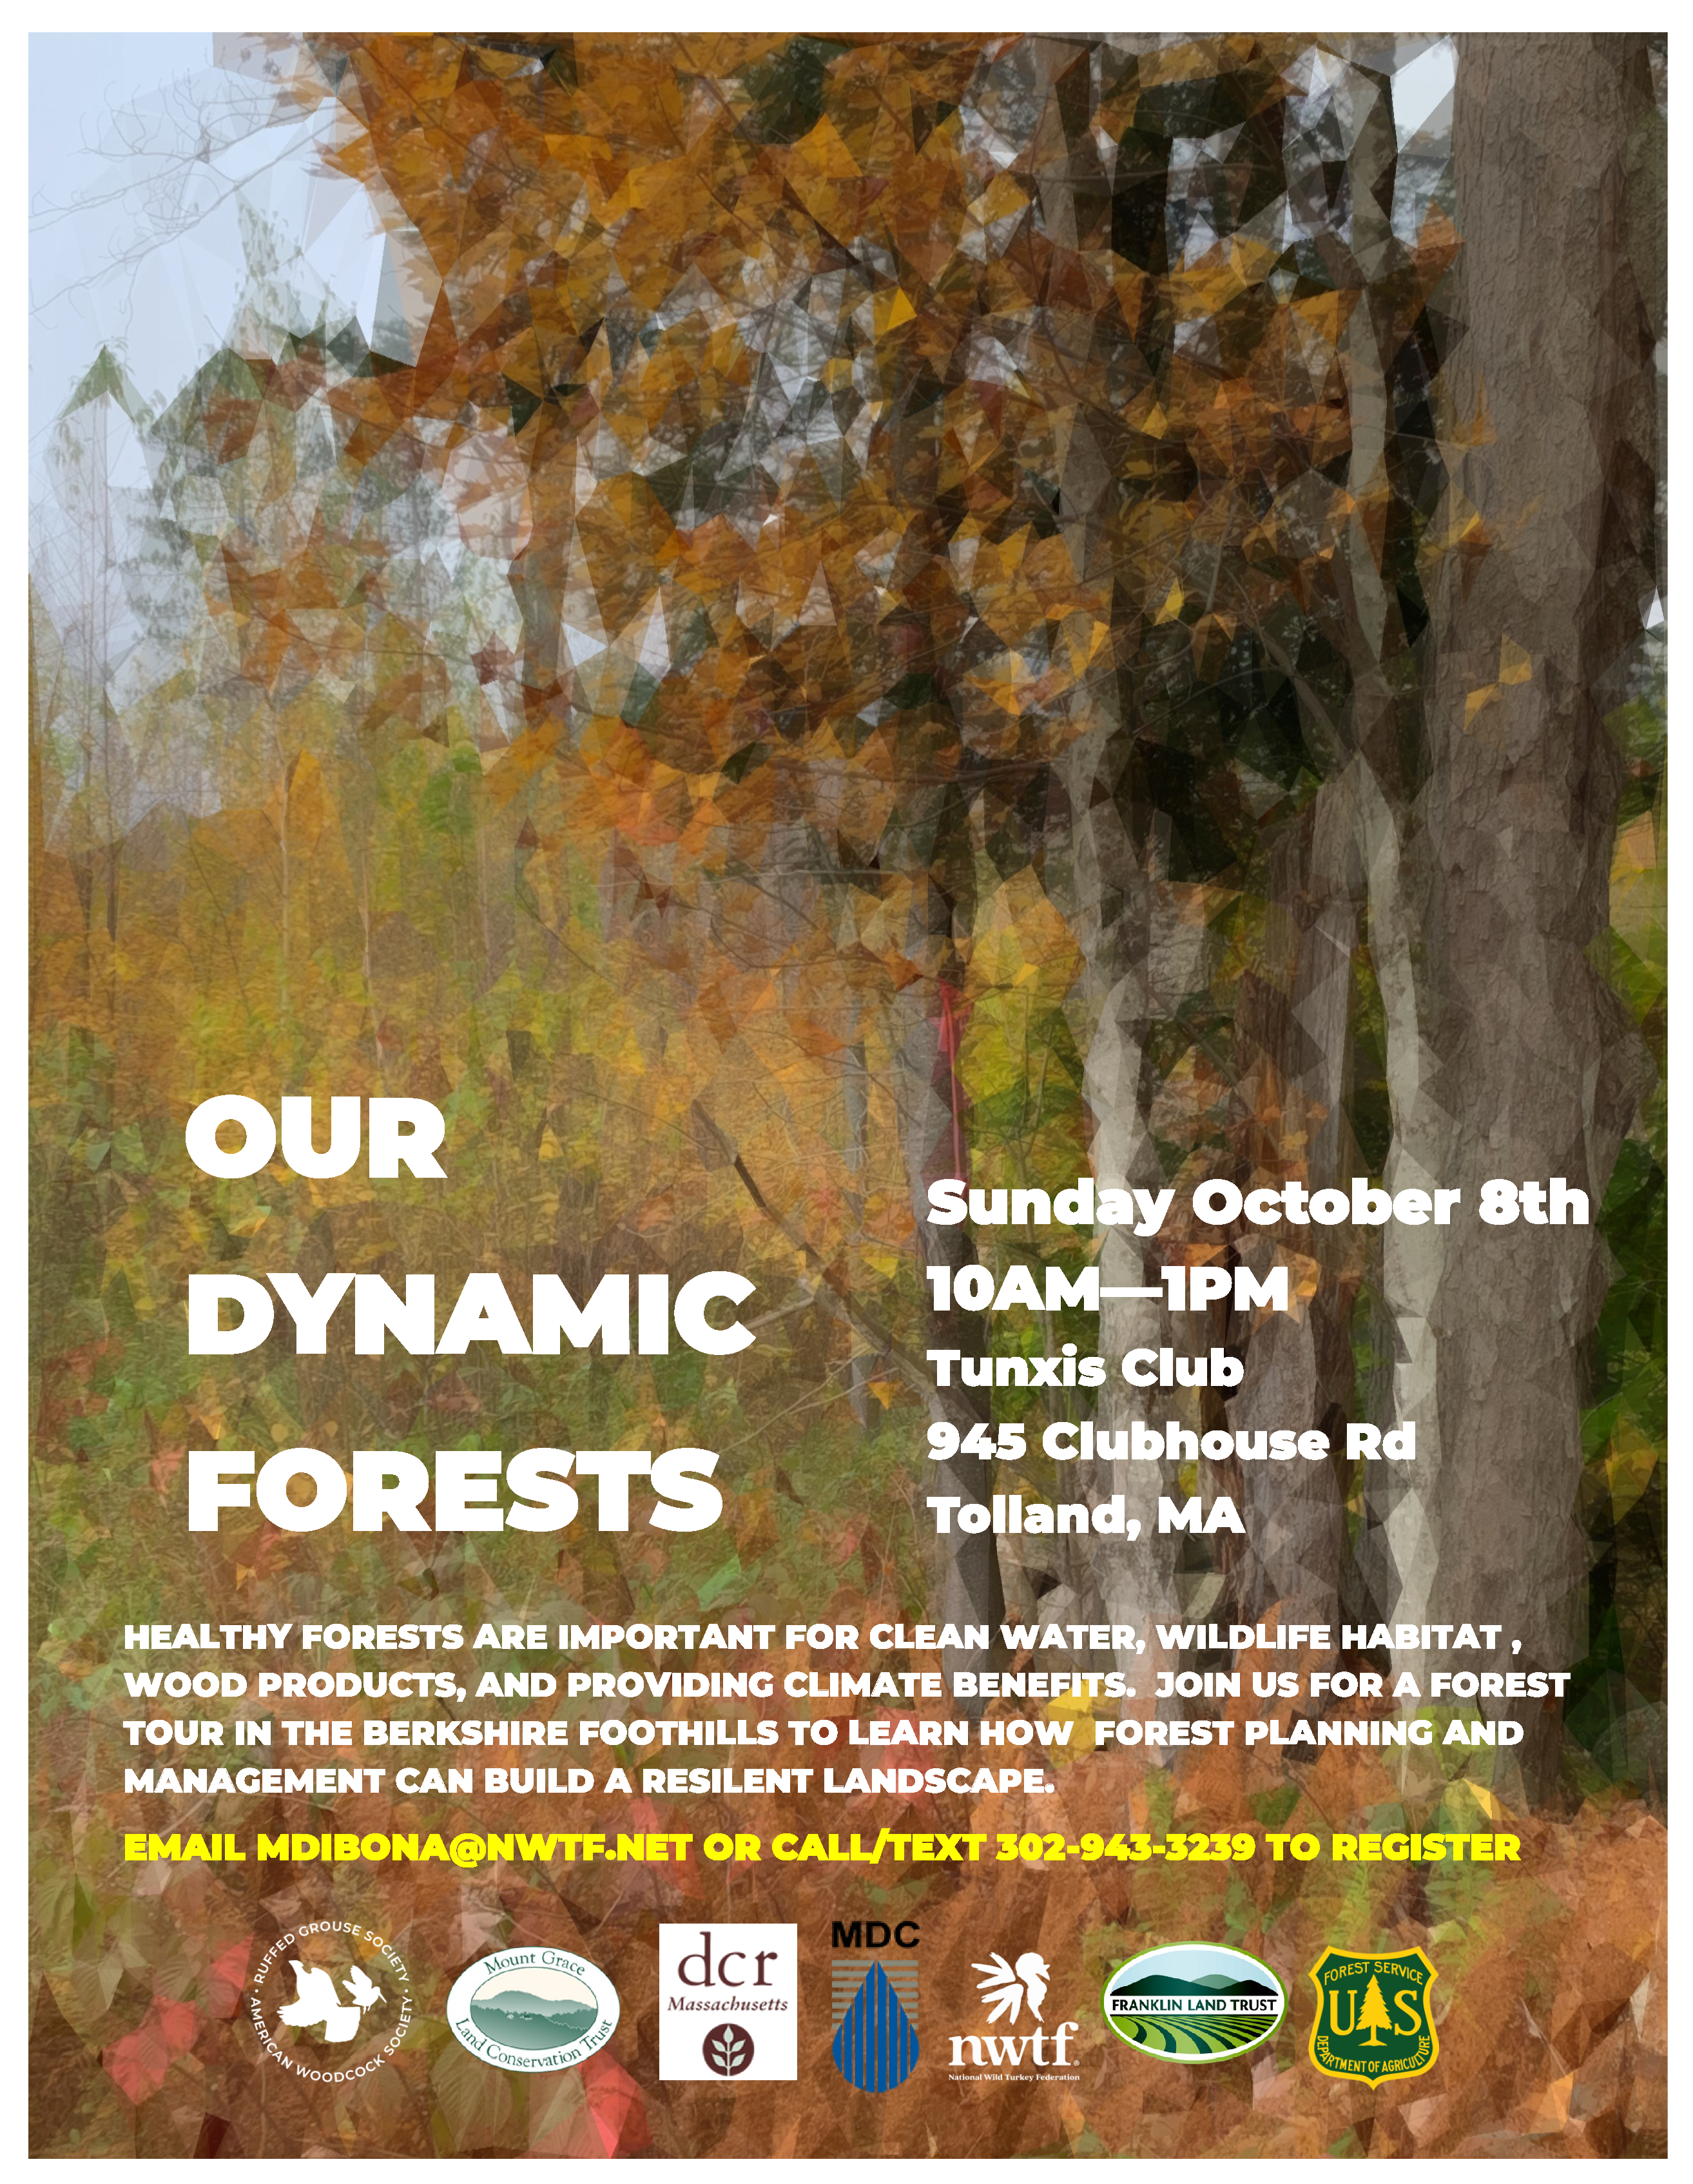 Our Dynamic Forests - Walking Tour